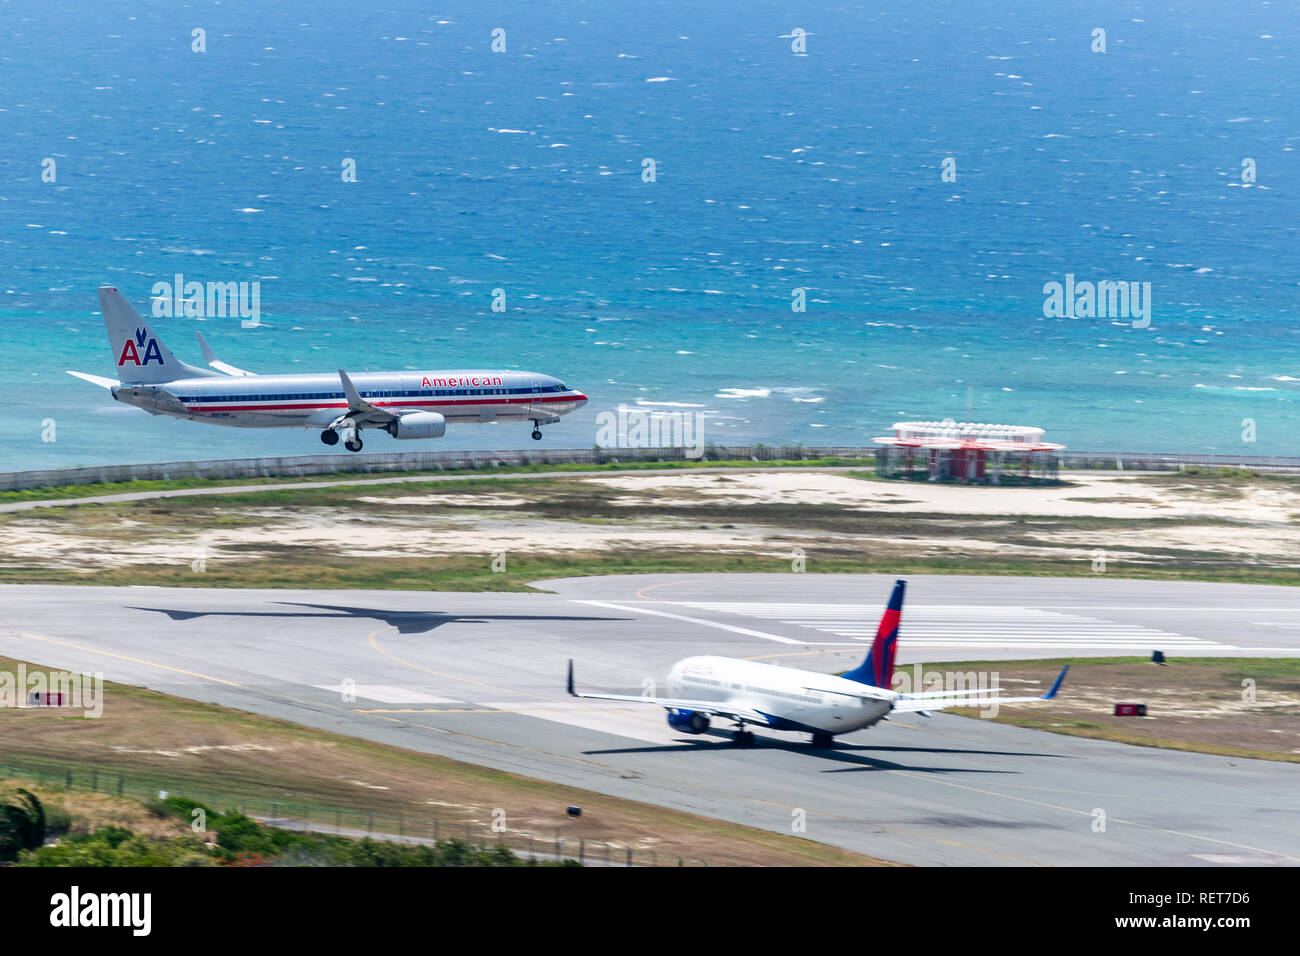 Montego Bay, Jamaica - July 03 2015: American Airlines aircraft landing while Delta waits to depart from the Sangster International Airport (MBJ) Stock Photo